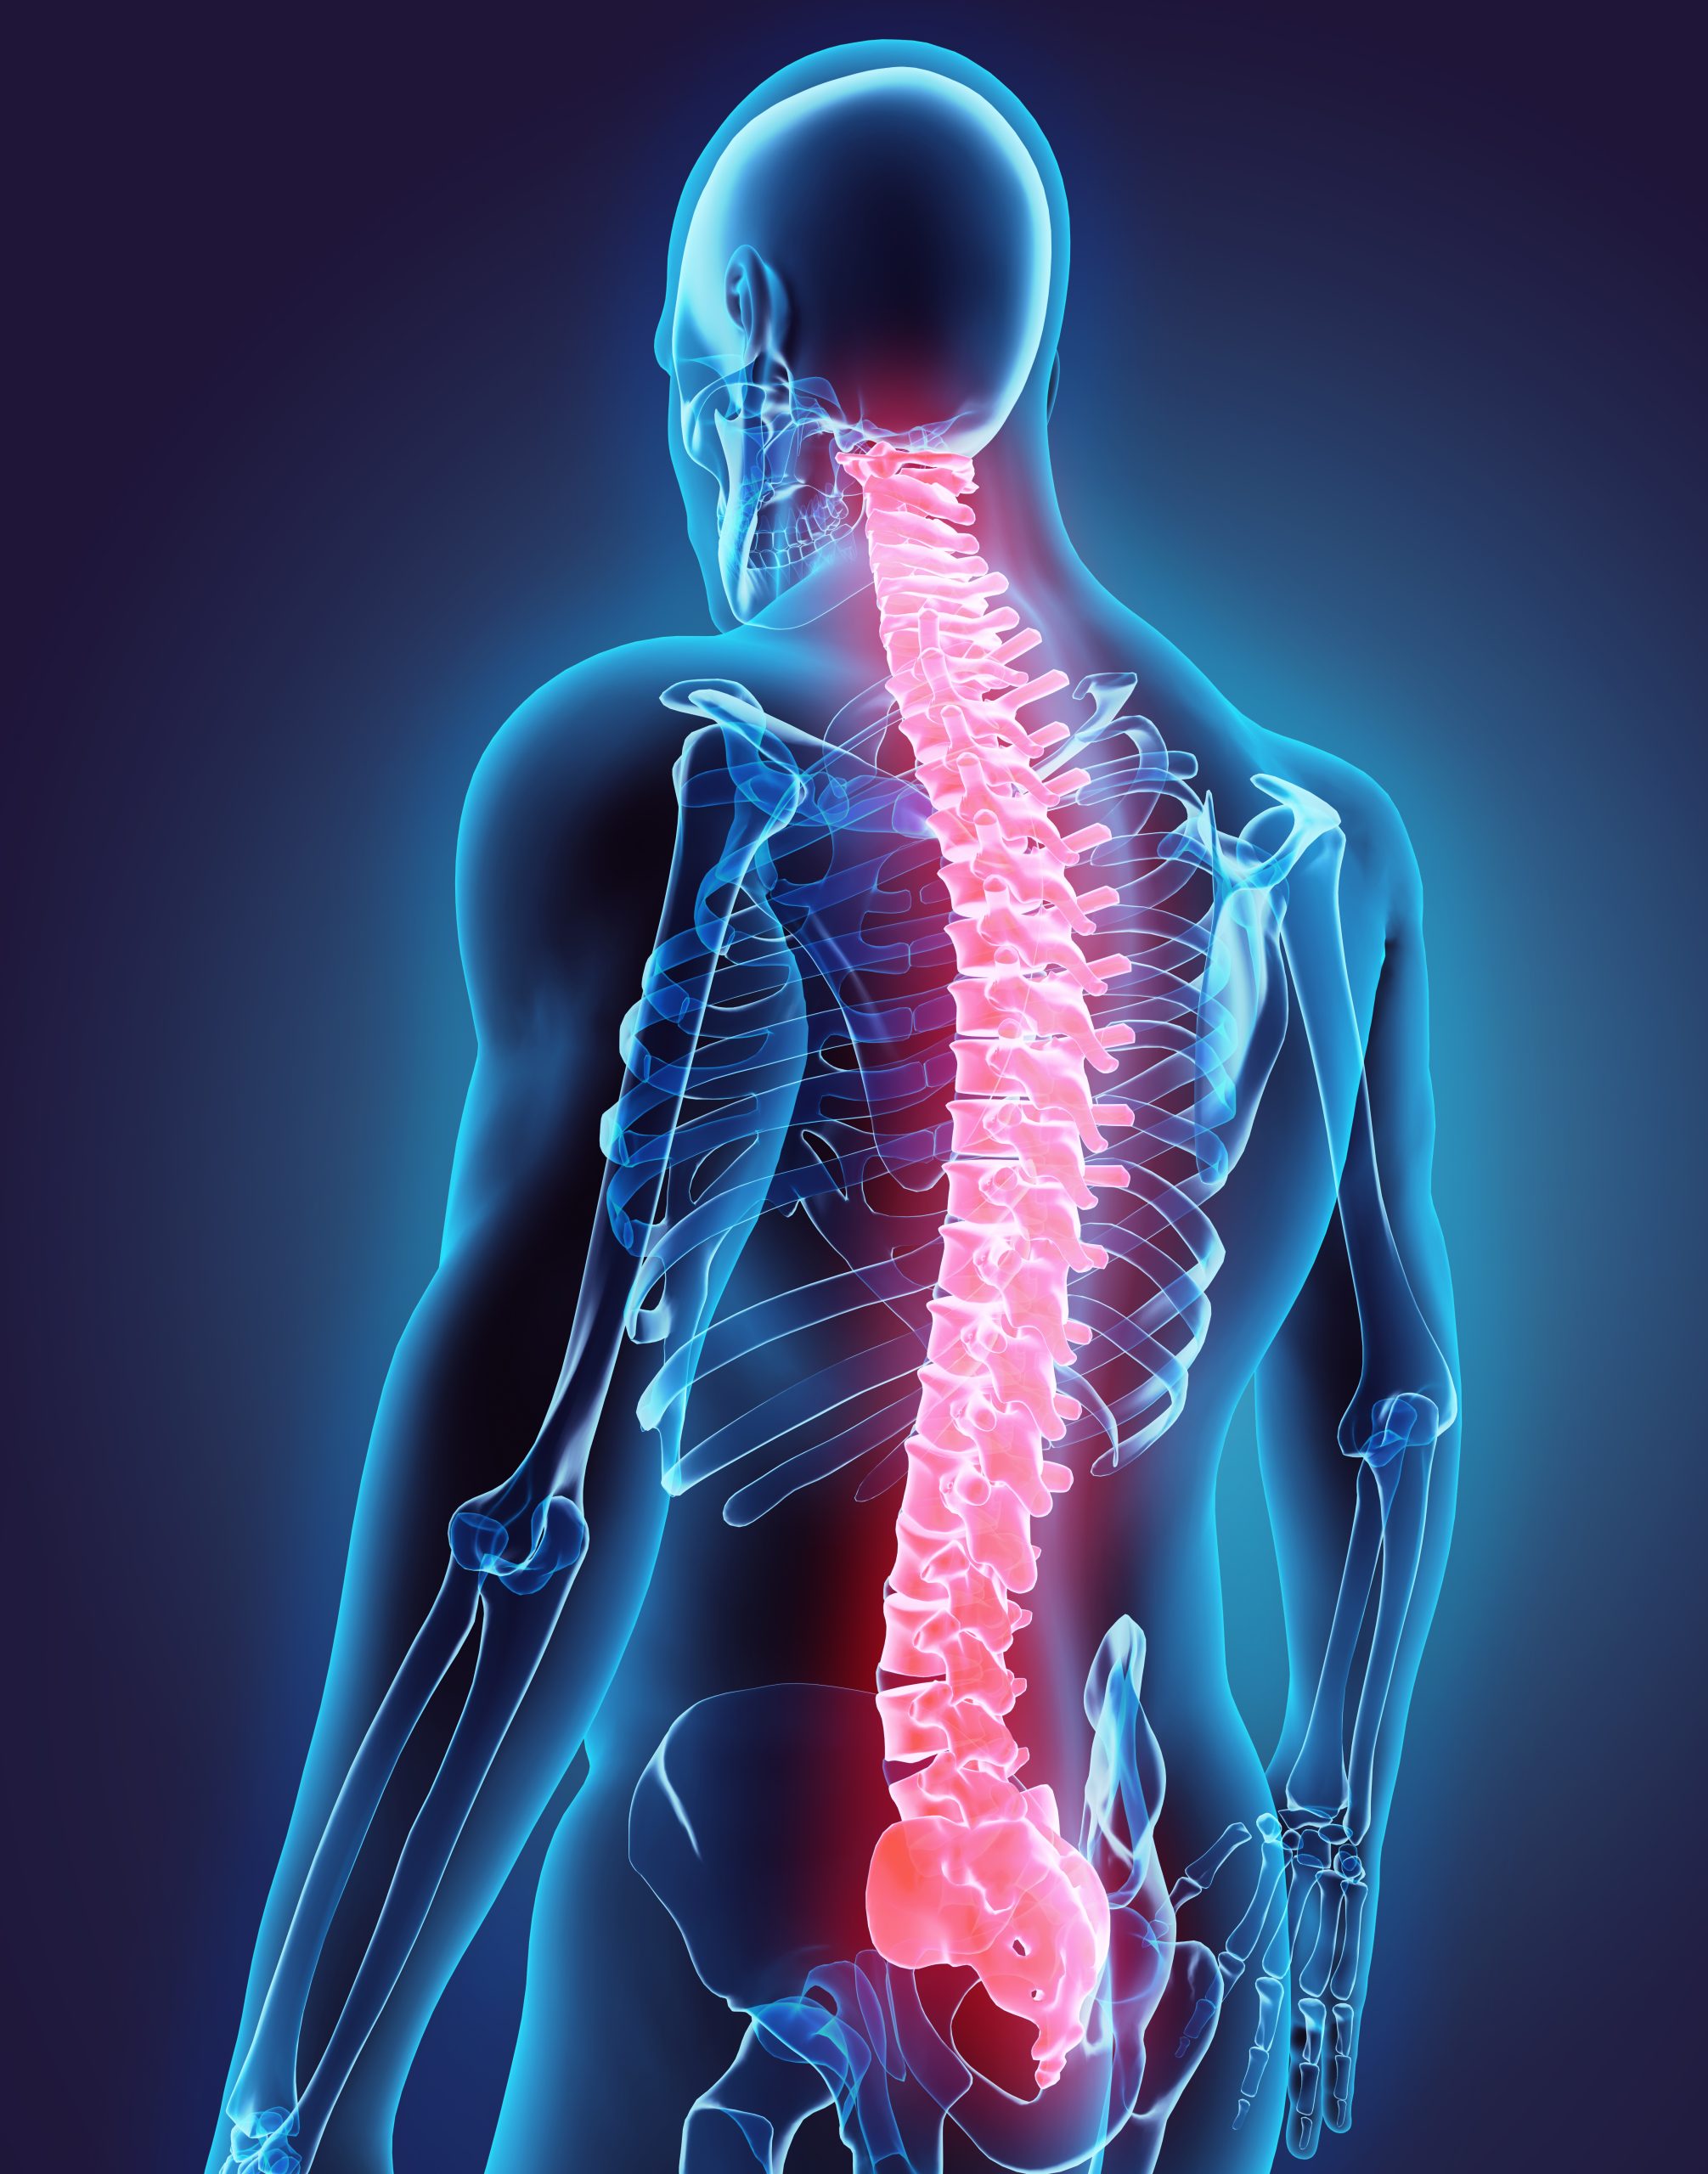 What Lawyers Should Know About Spinal Cord Stimulators - OAS